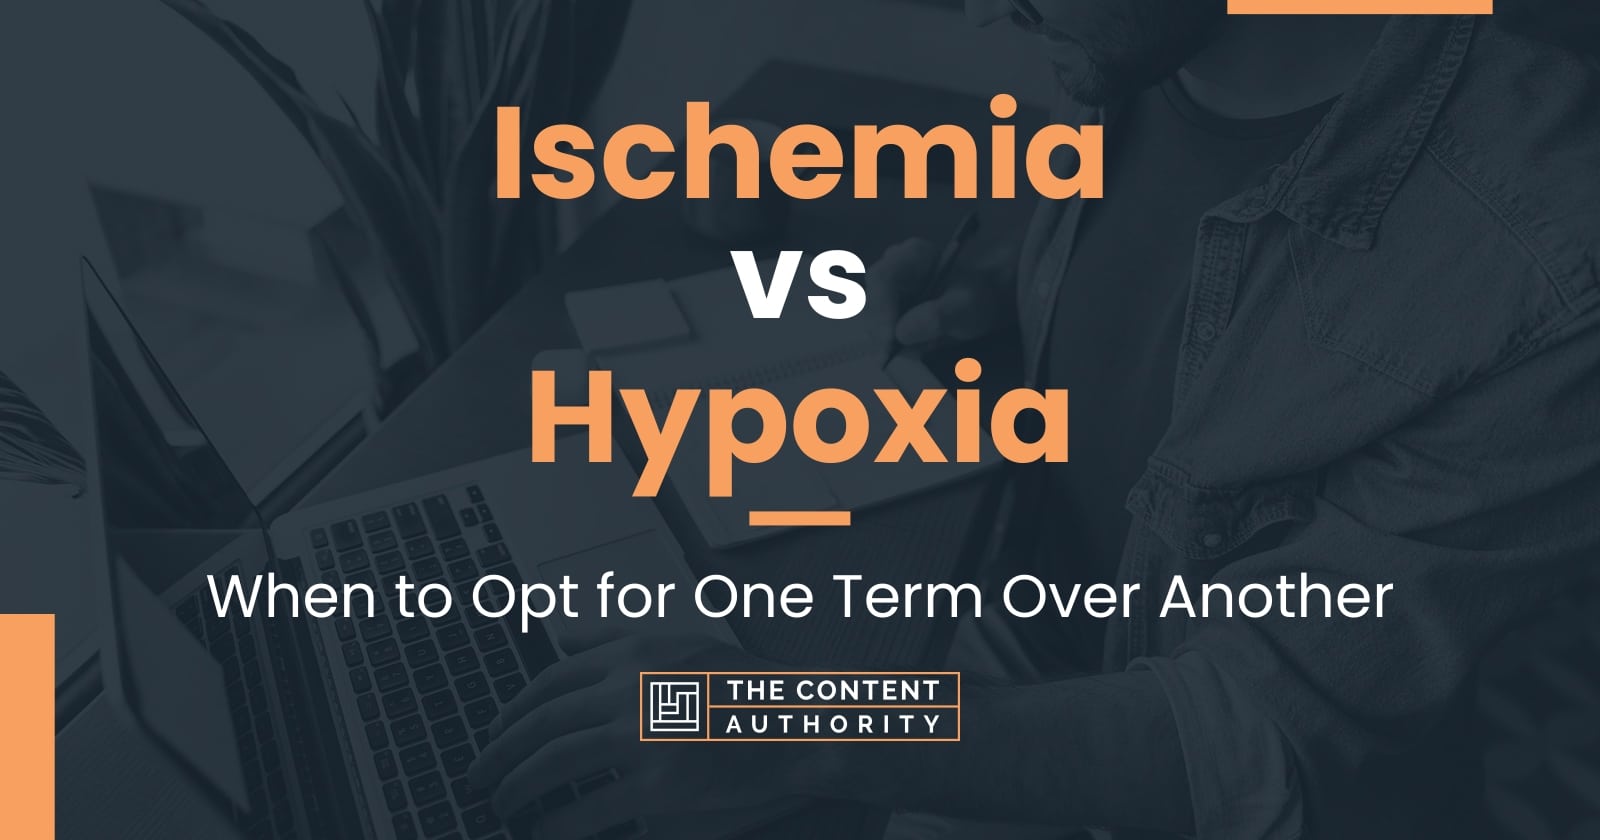 Ischemia vs Hypoxia: When to Opt for One Term Over Another